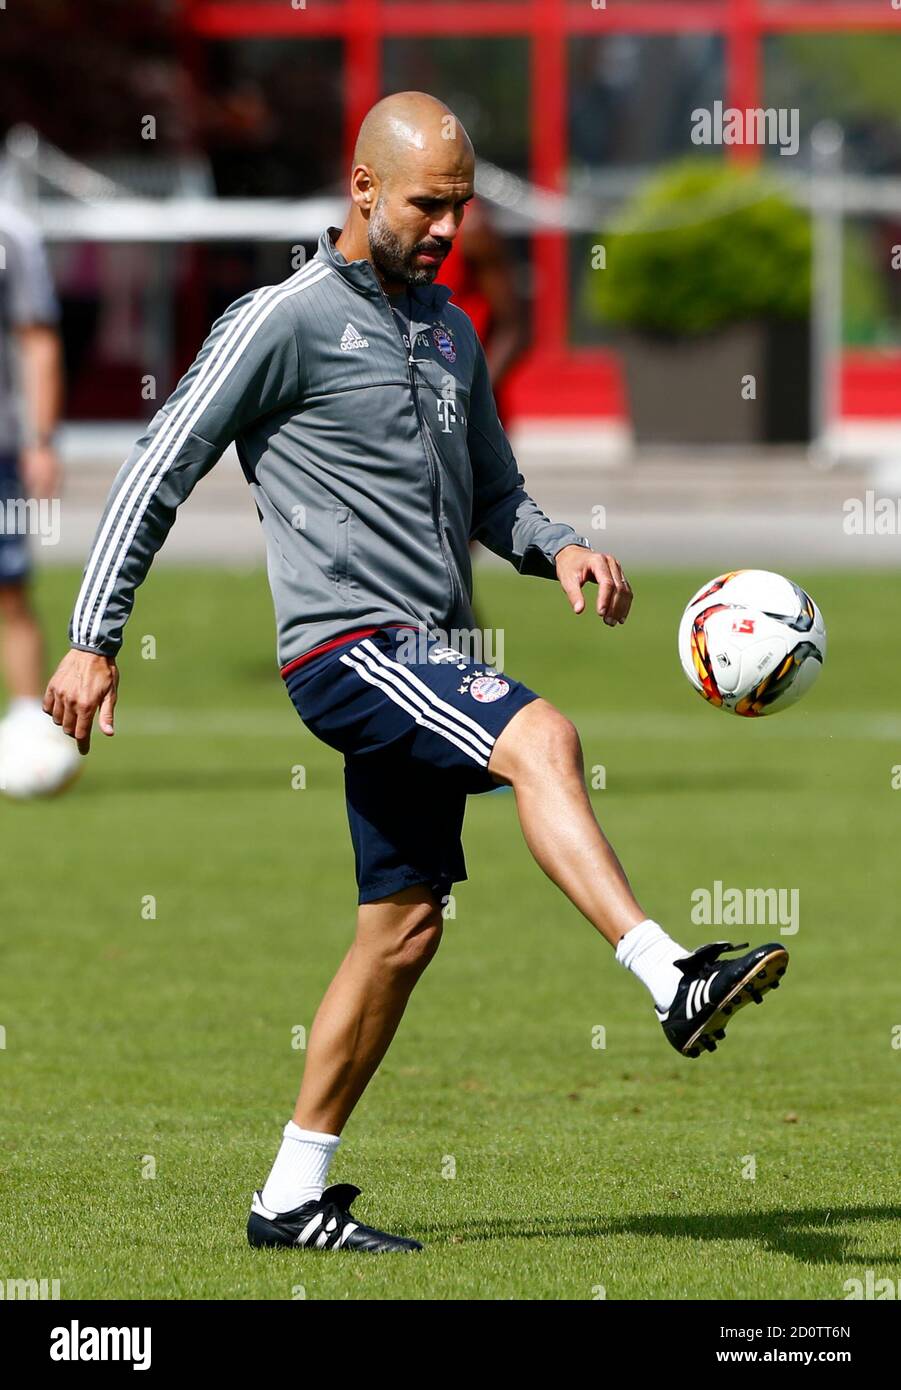 Bayern Munich's head coach Pep Guardiola controls a ball during a training  session in Munich, Germany July 27, 2015. REUTERS/Michaela Rehle Stock  Photo - Alamy